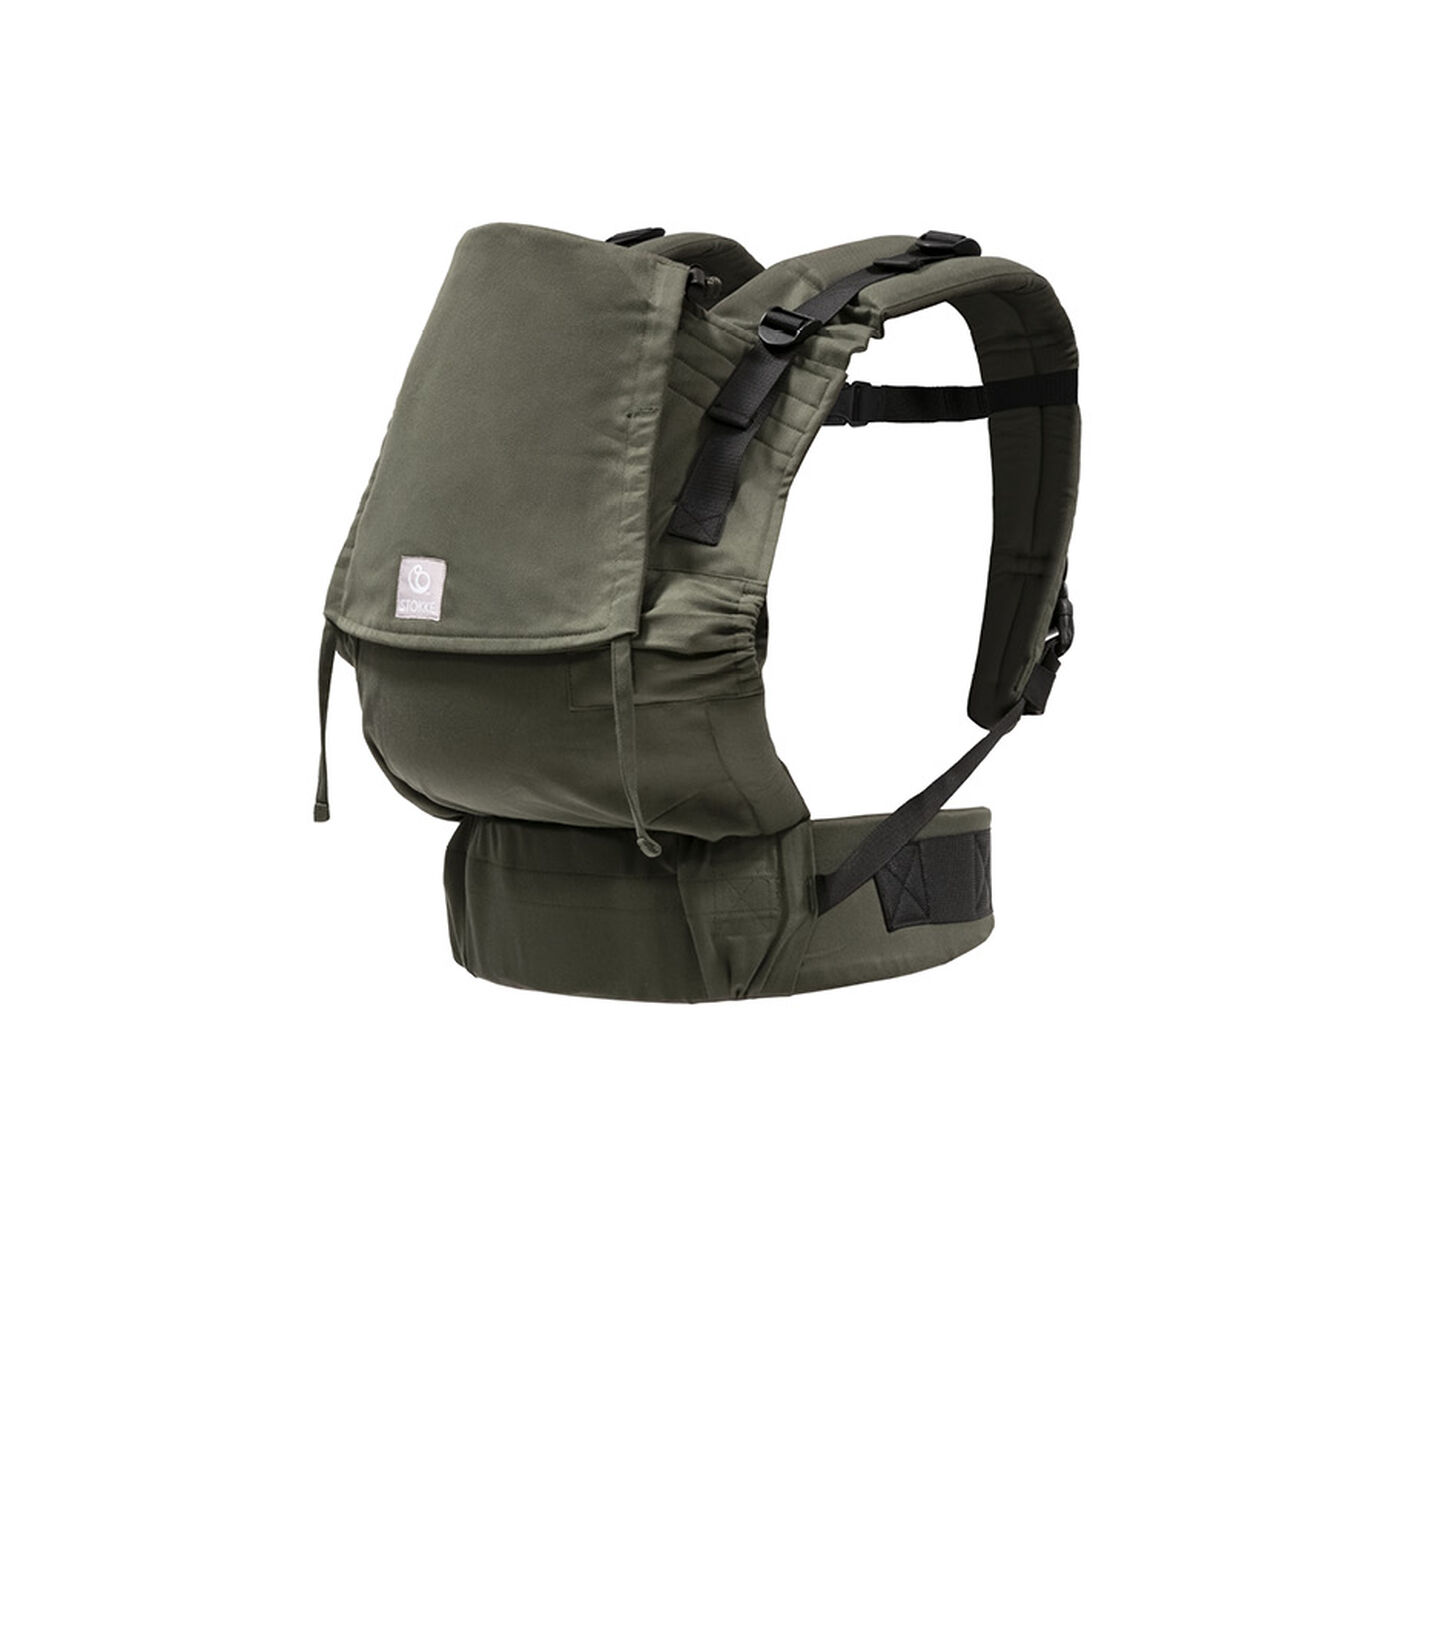 Stokke® Limas™ babydrager Flex Olive Green OCS, Olive Green, mainview view 1